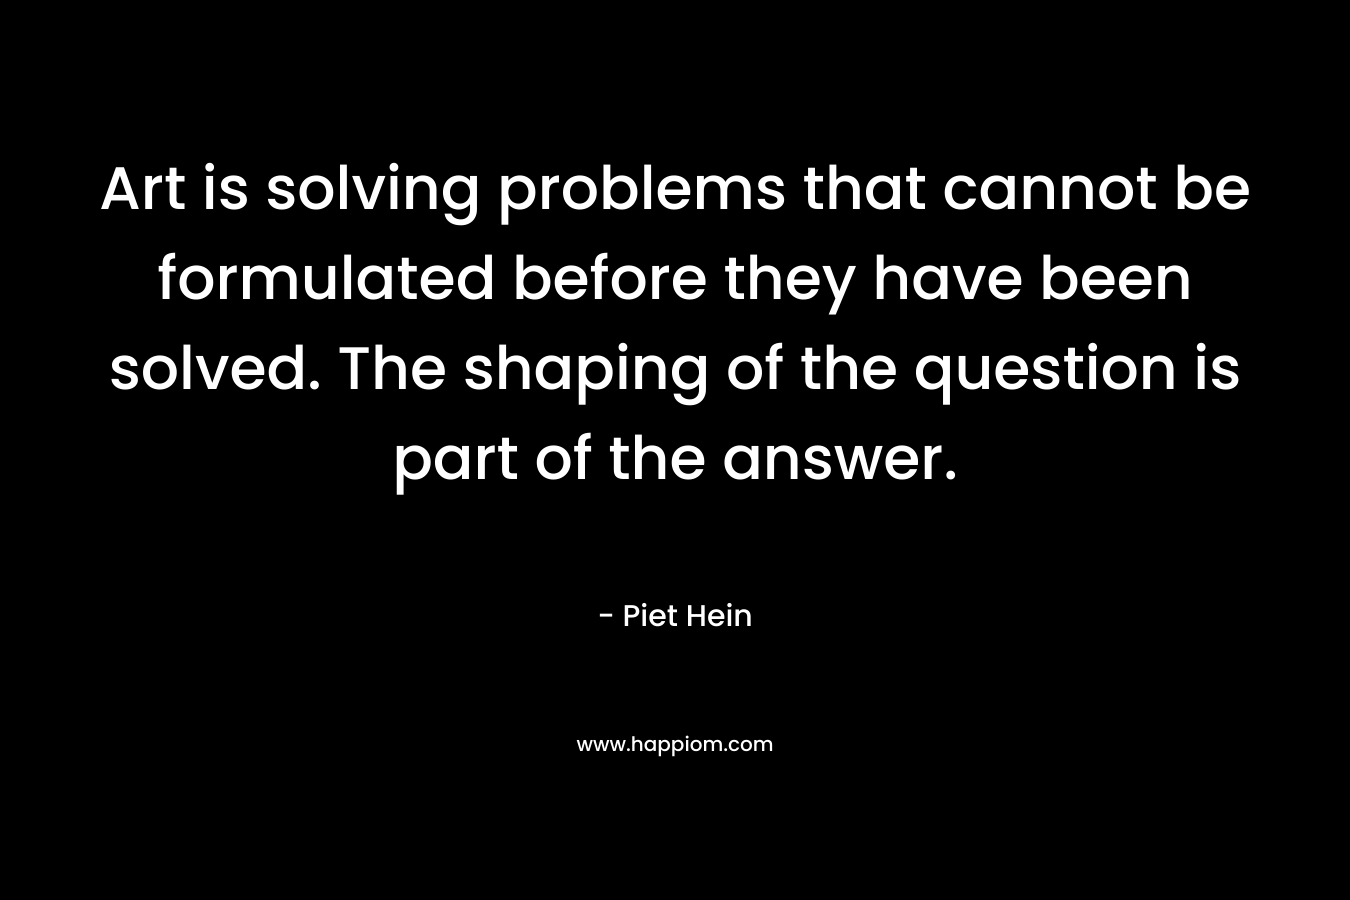 Art is solving problems that cannot be formulated before they have been solved. The shaping of the question is part of the answer.